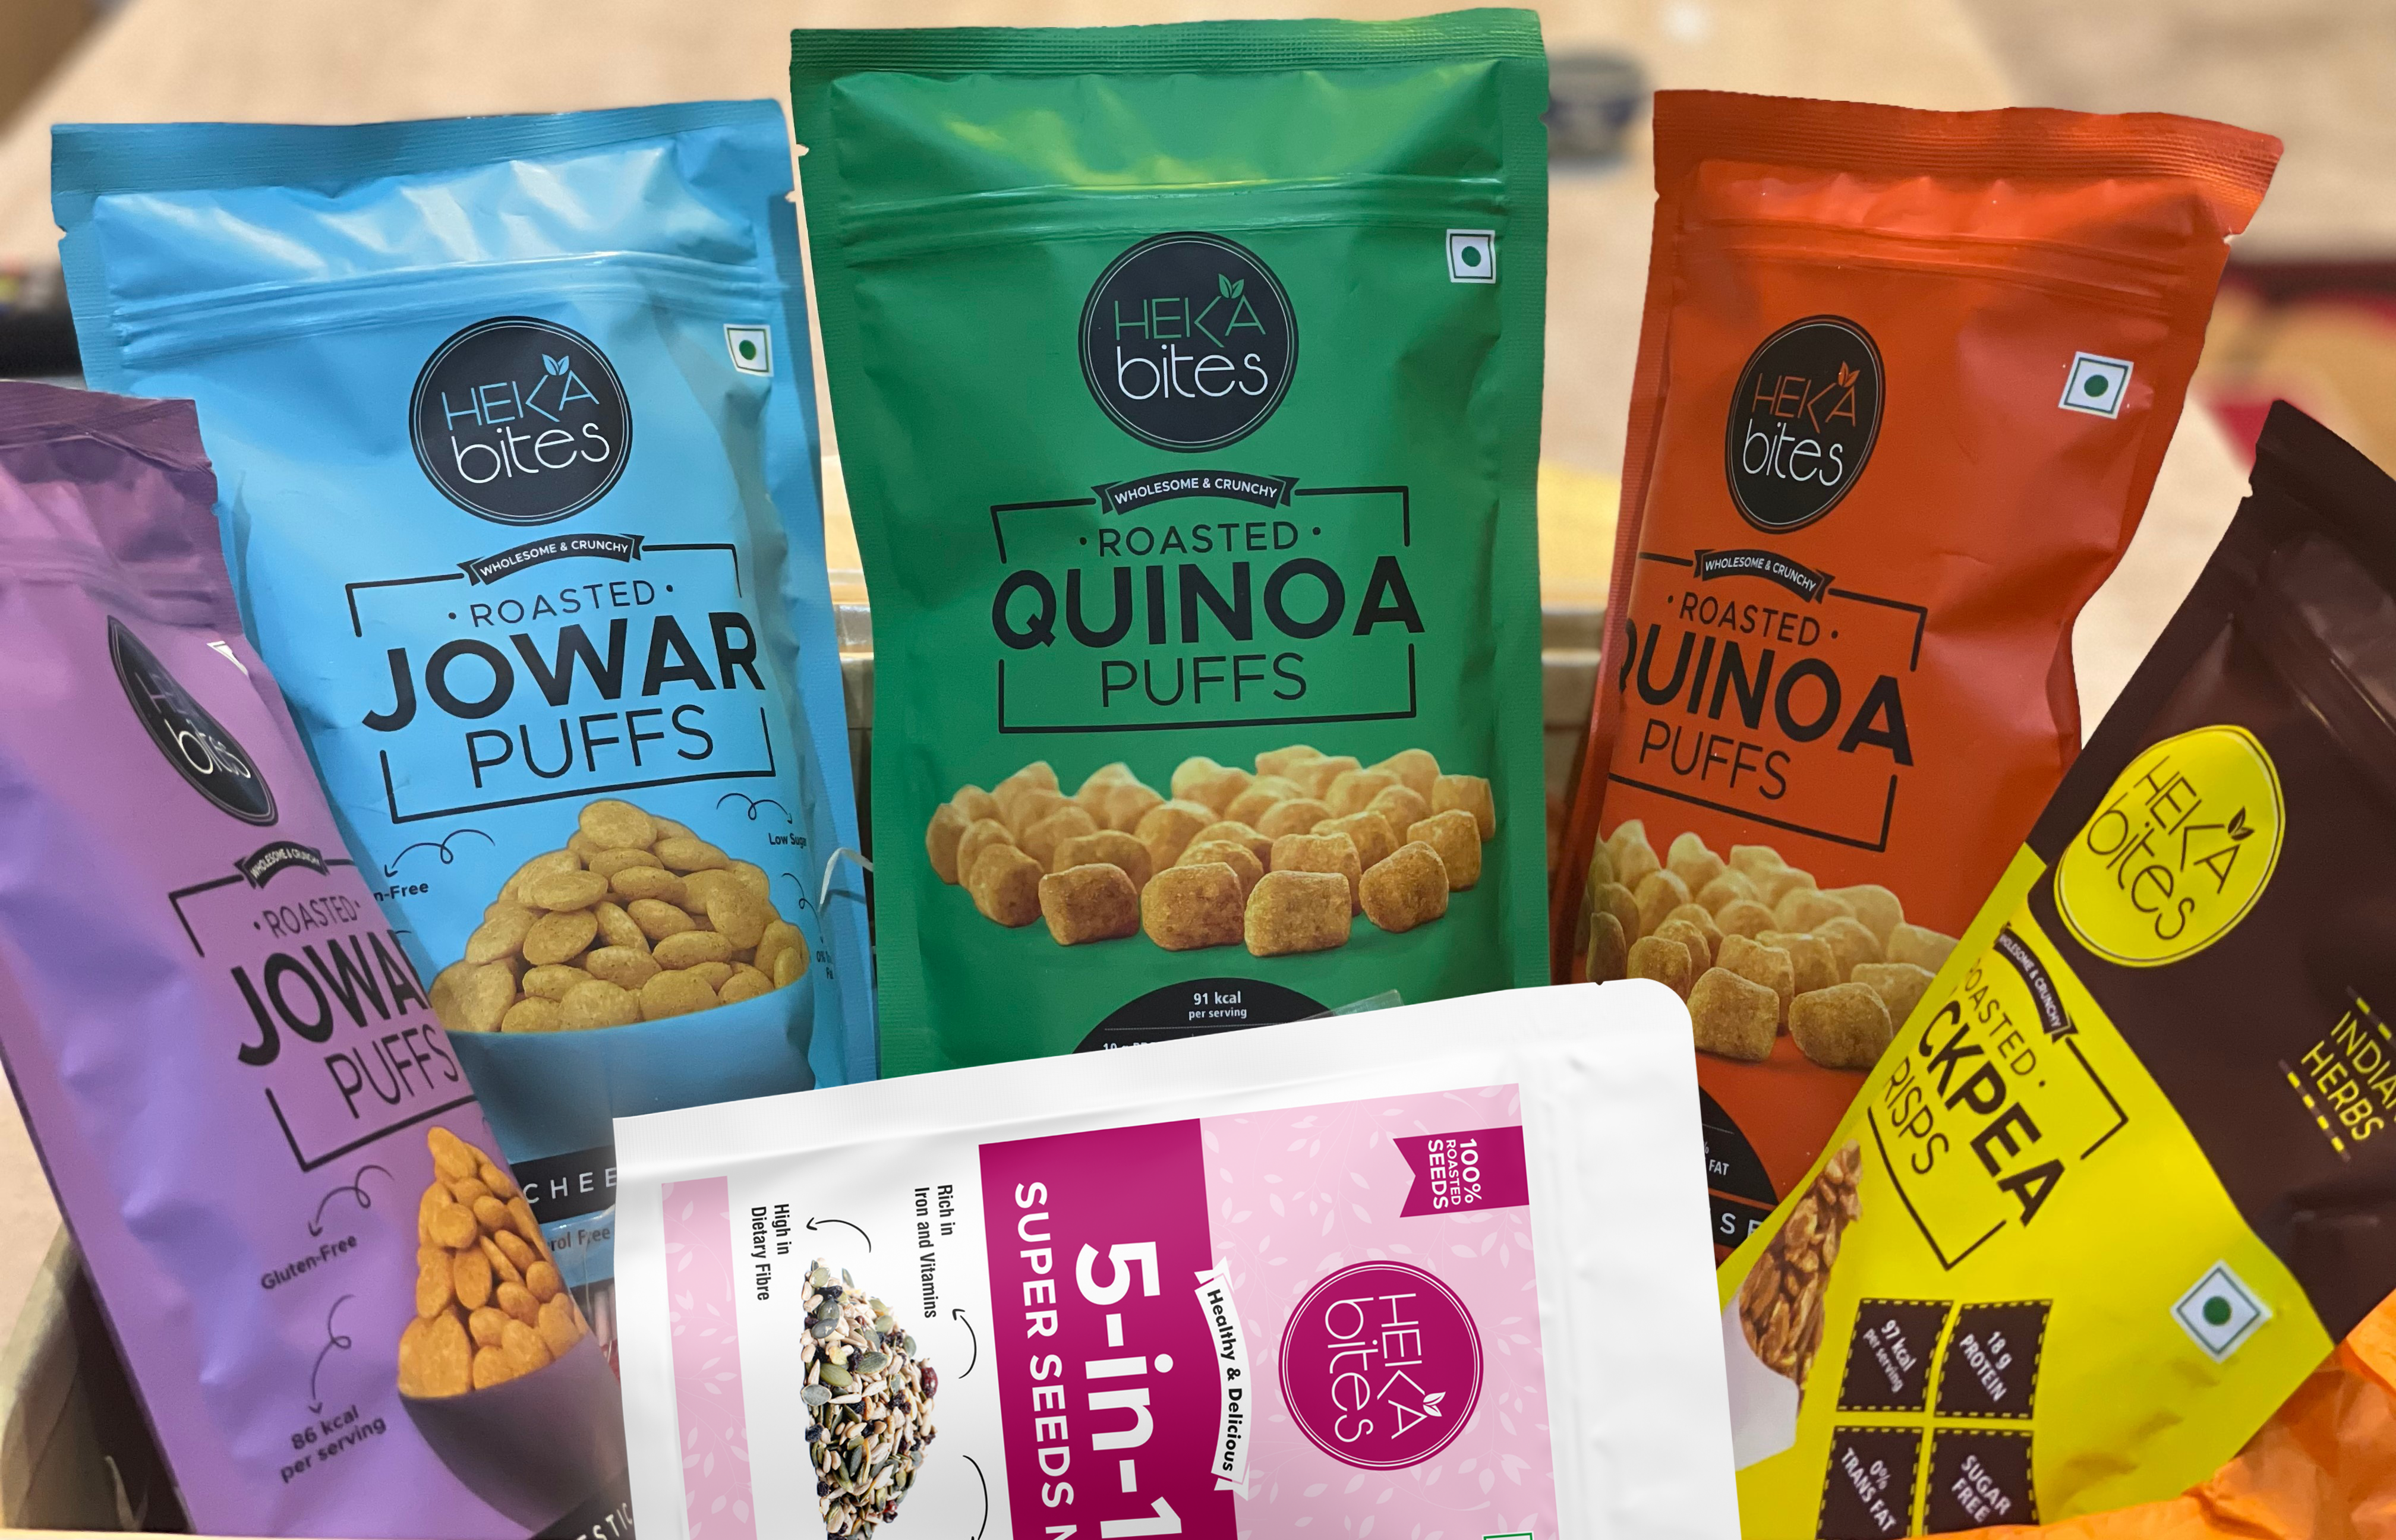 Heka Bites Gourmet Hamper with Healthy and Delicious Snacks